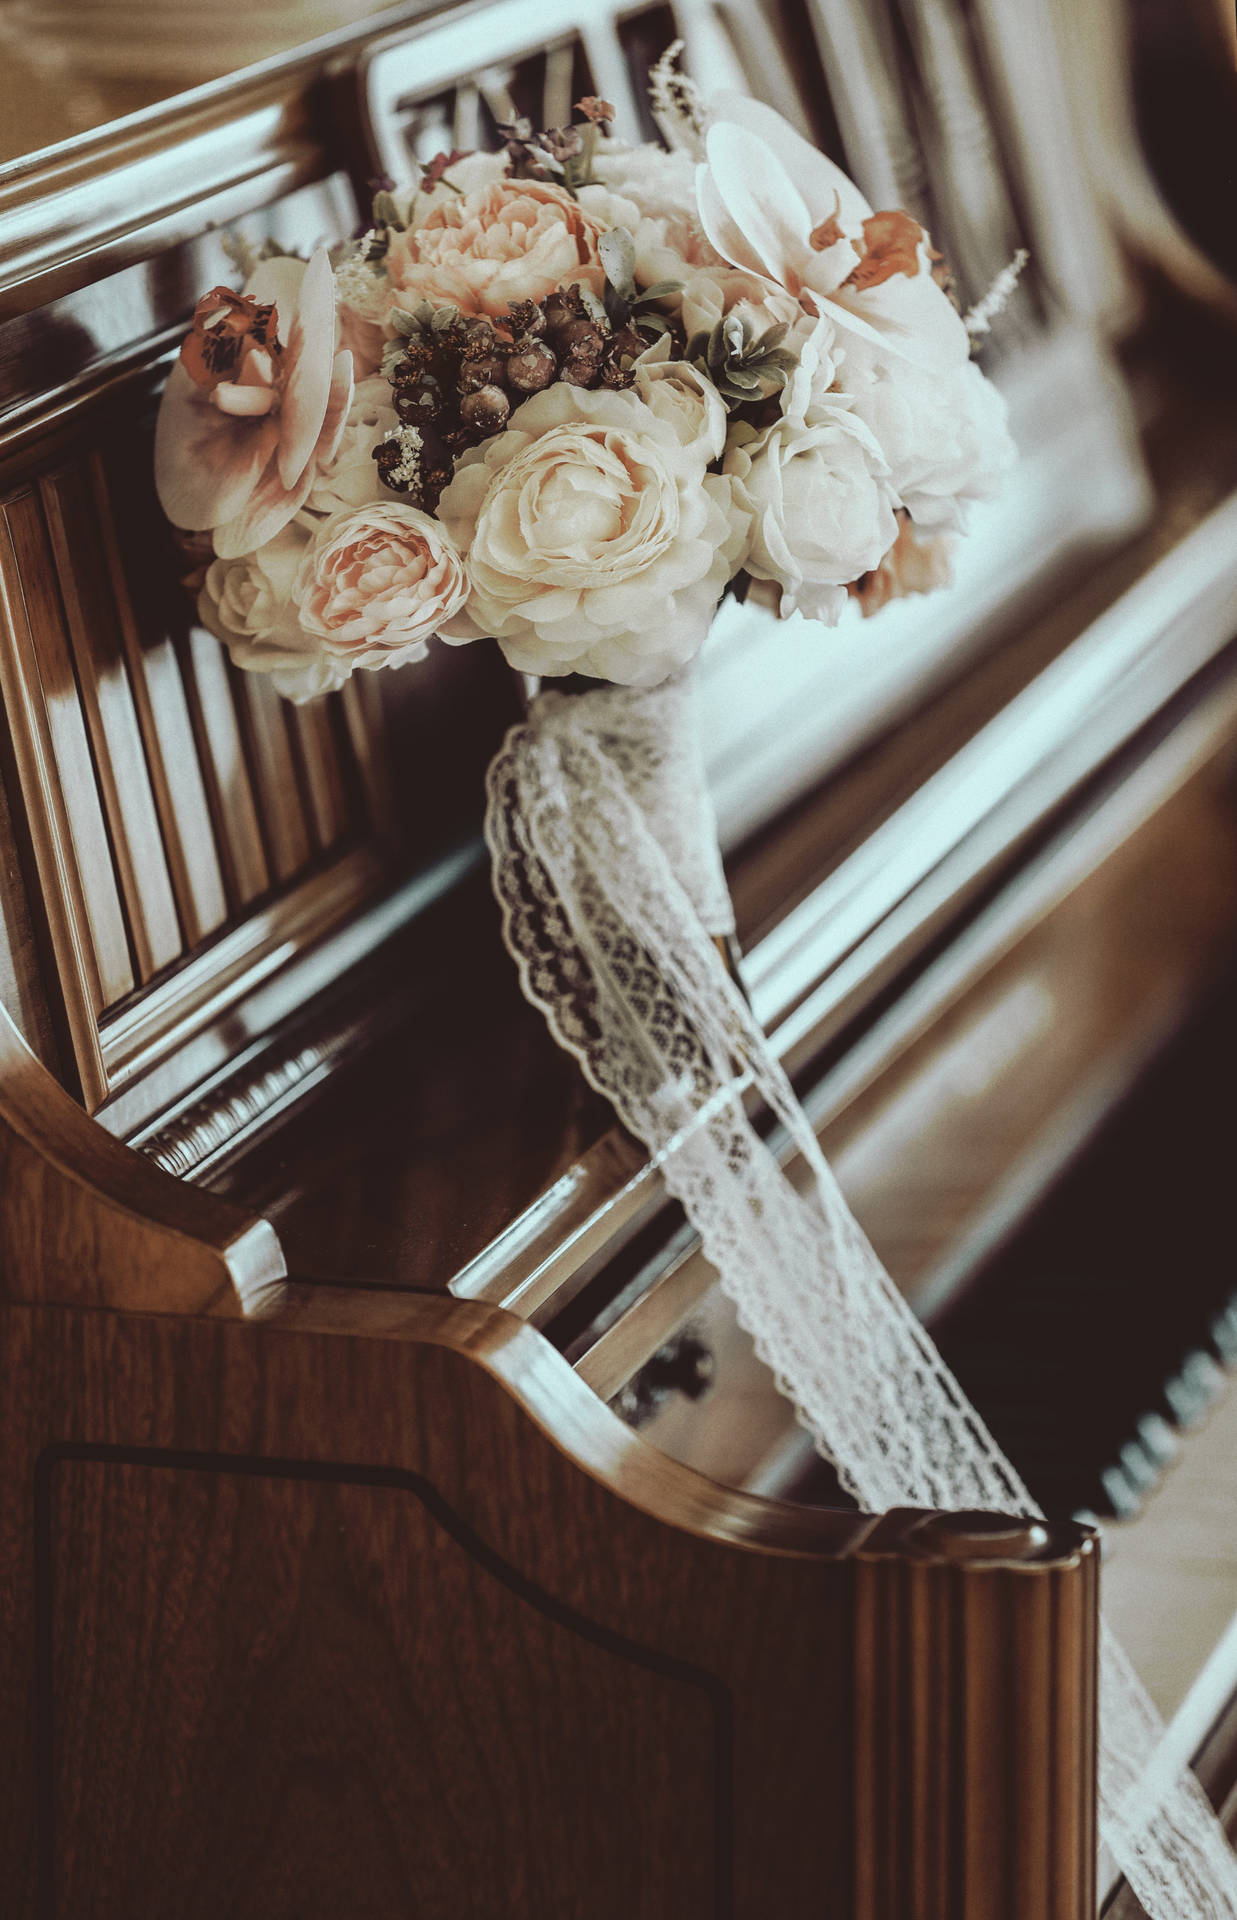 Piano With Hand Flower Bouquet Background